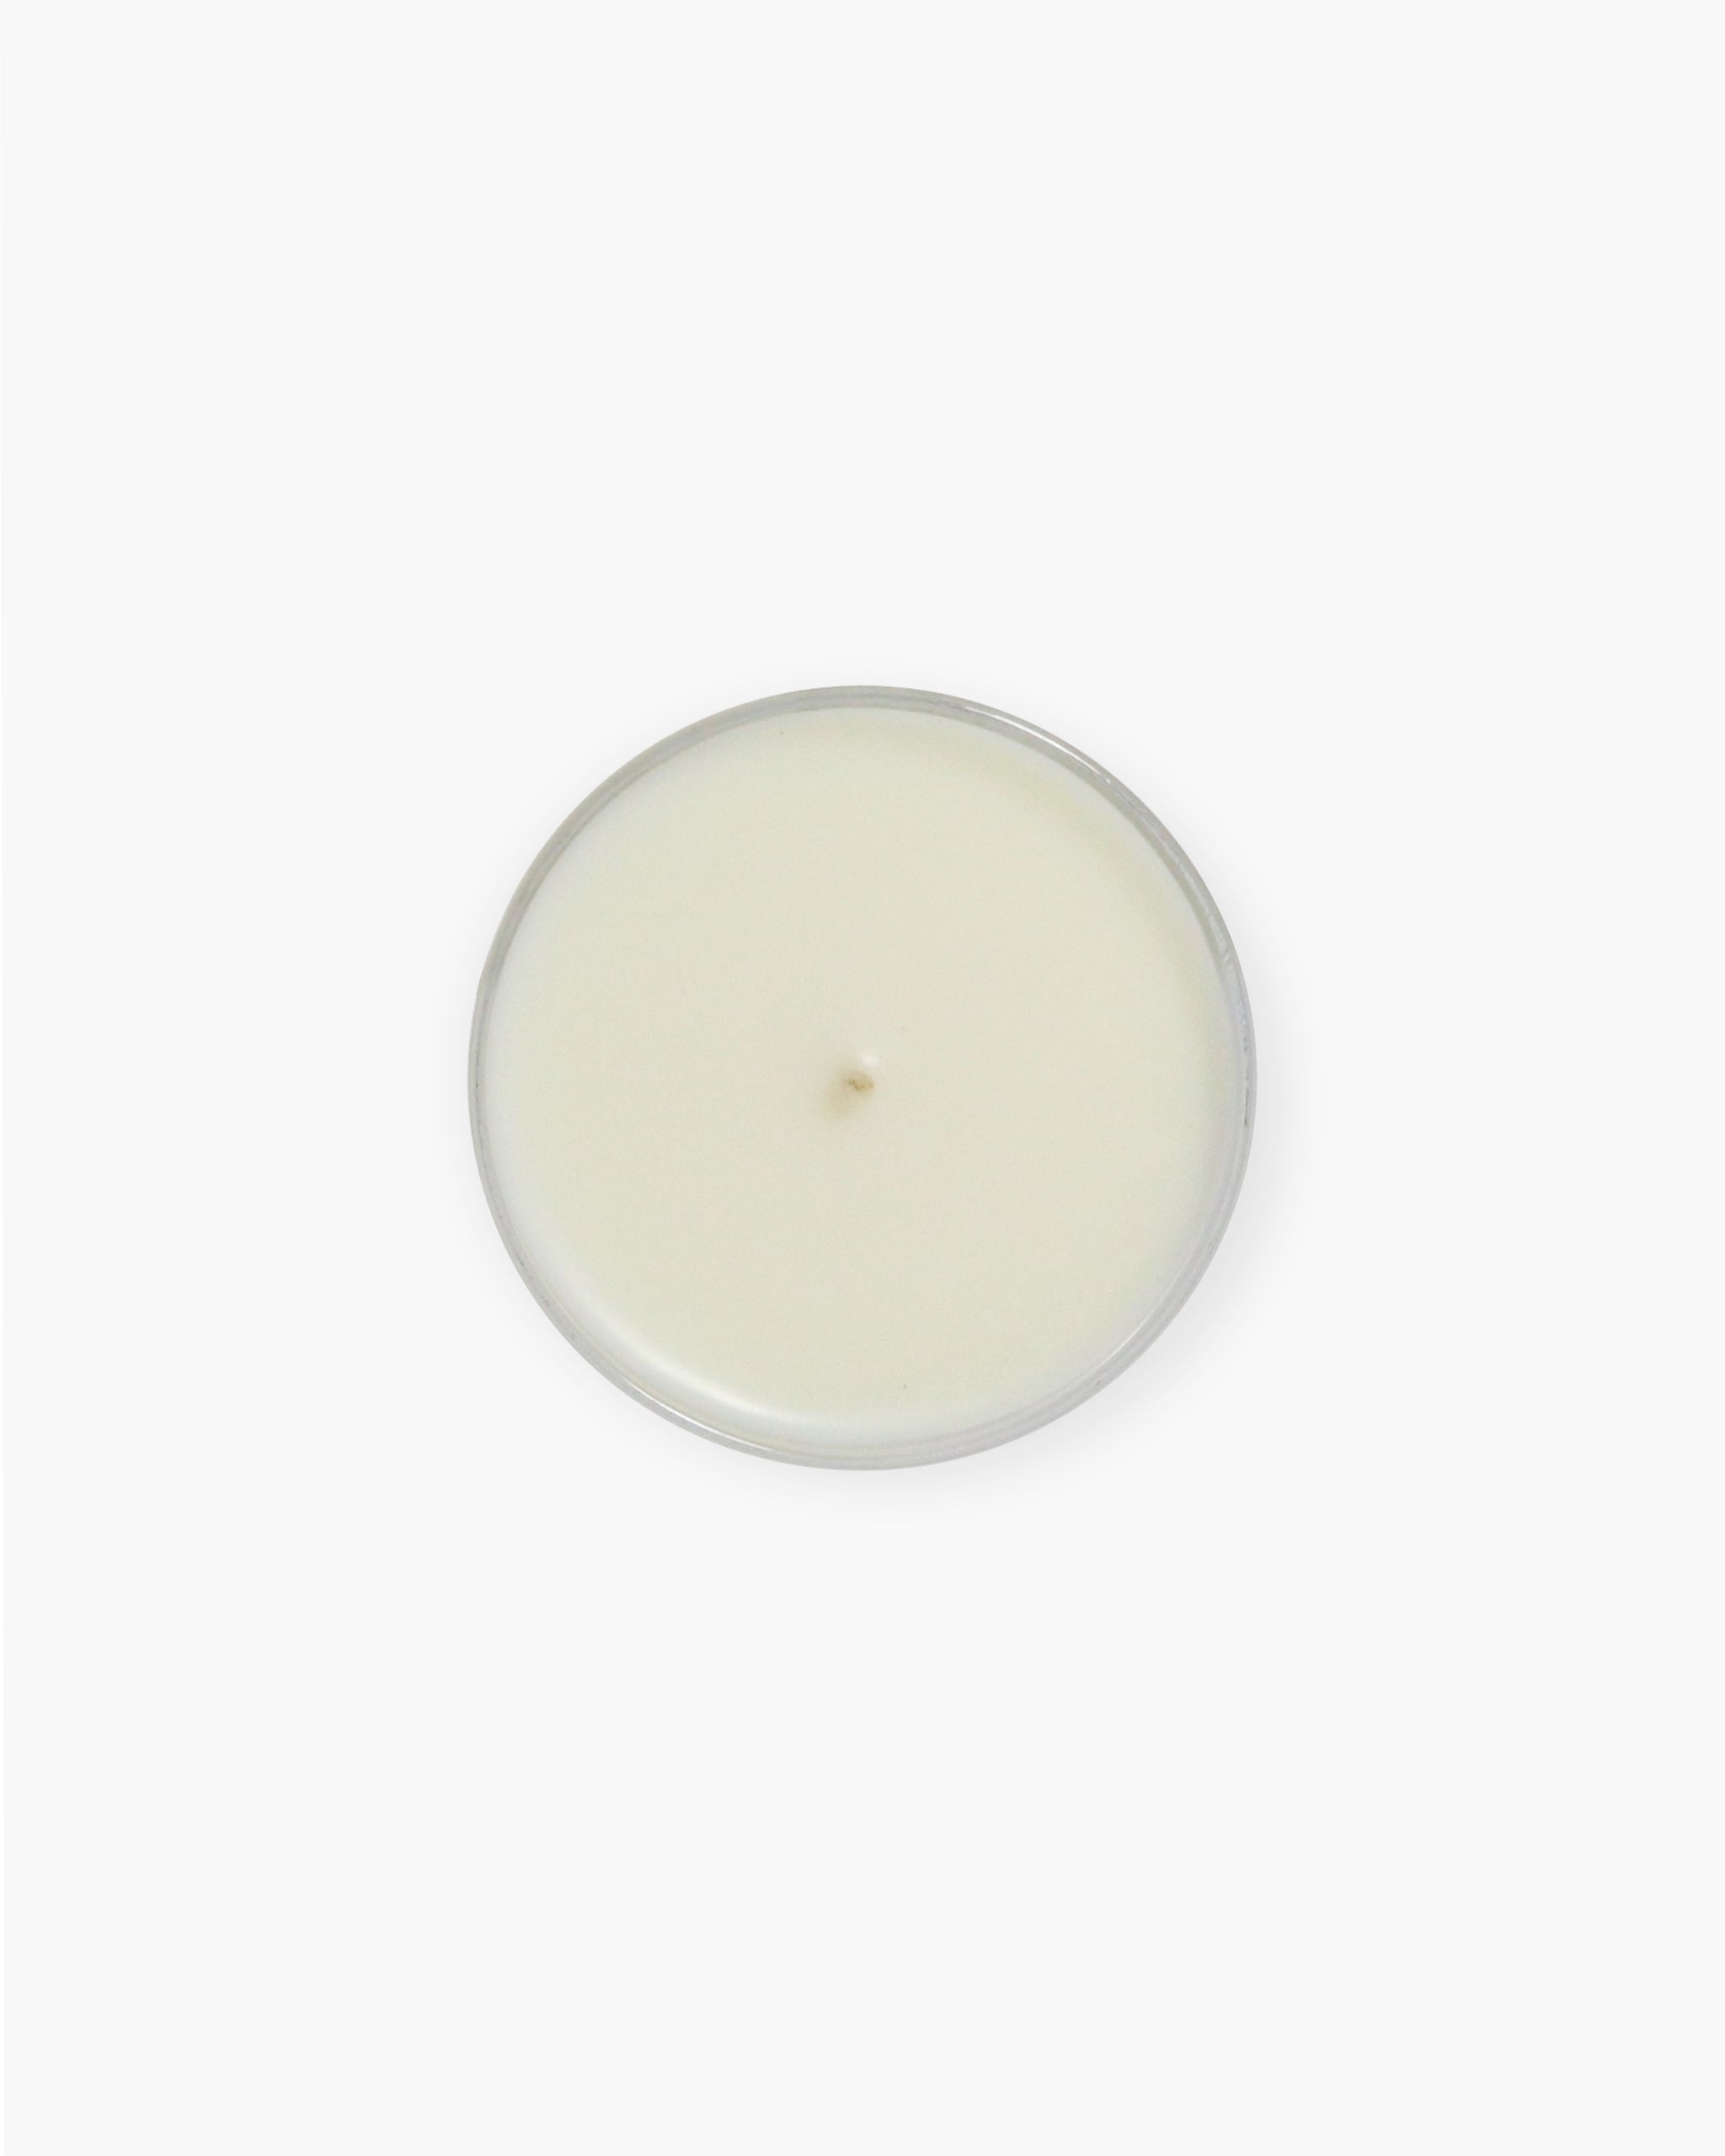 Accessories - Me Time Candle - 8oz